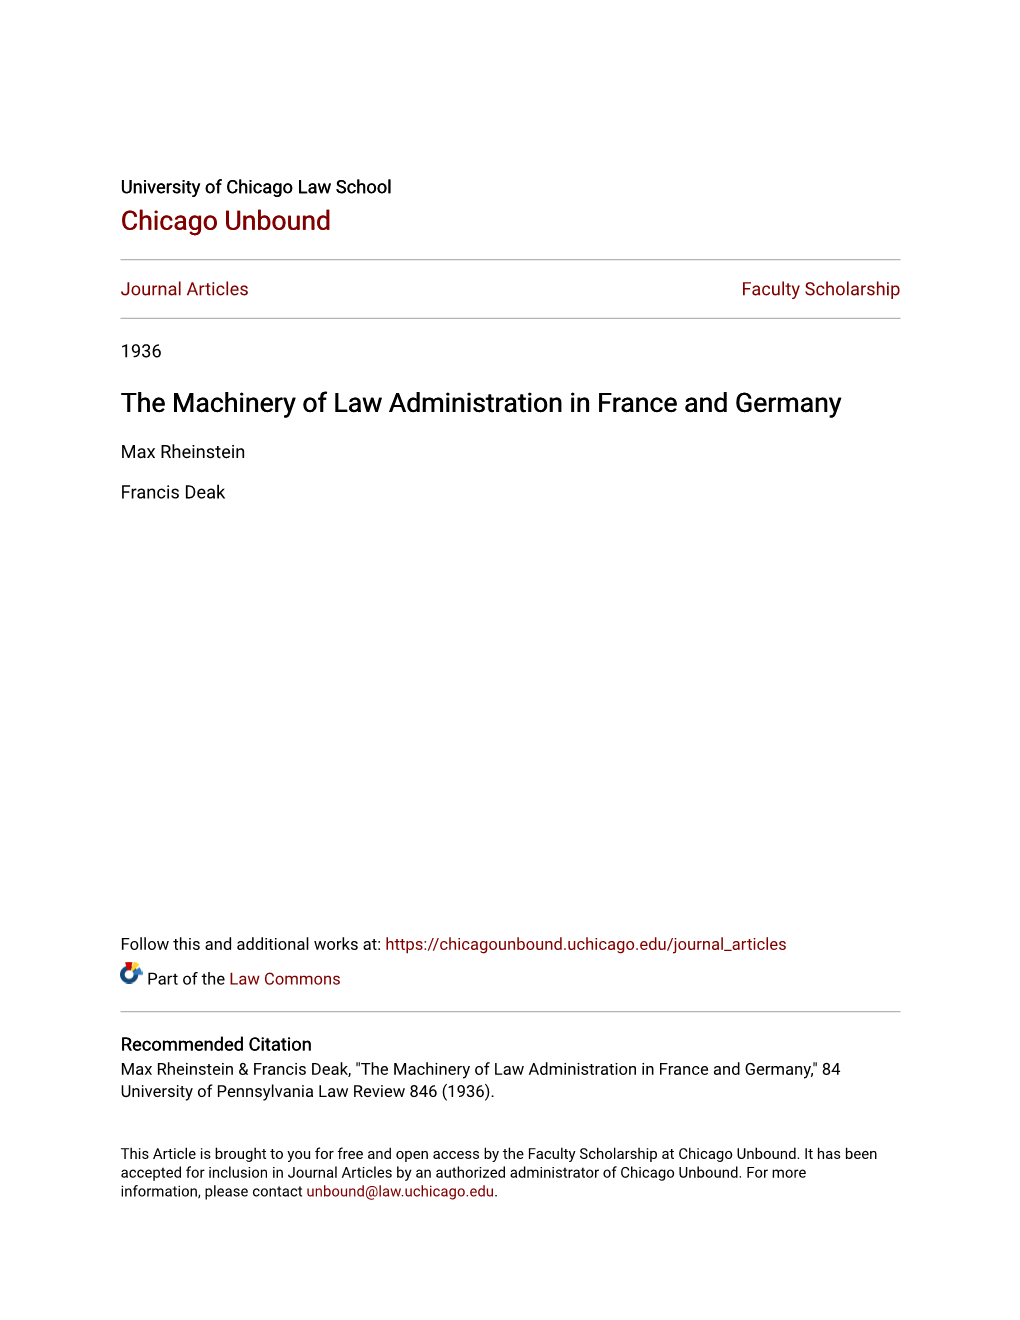 The Machinery of Law Administration in France and Germany